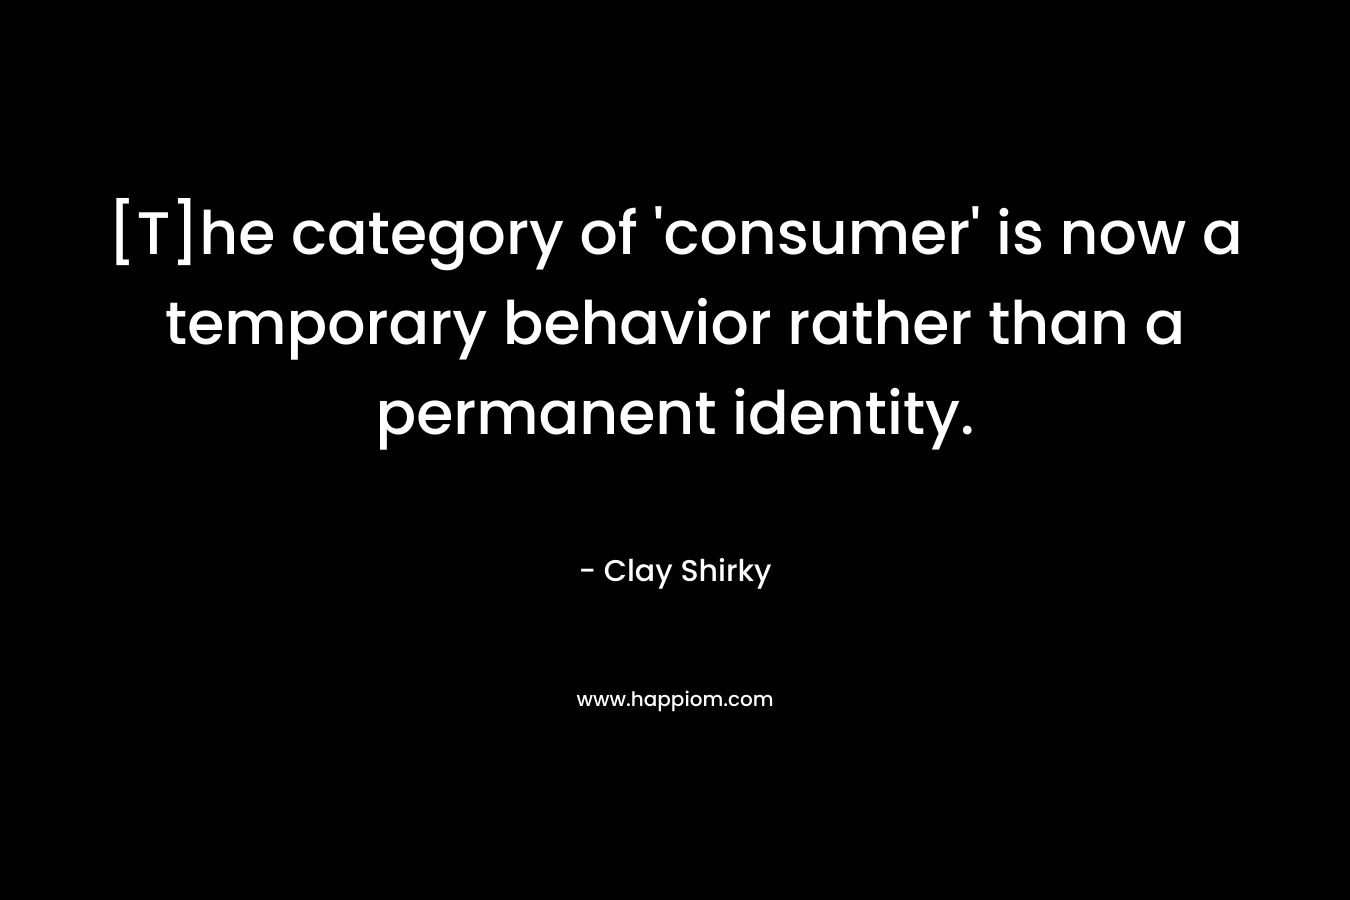 [T]he category of ‘consumer’ is now a temporary behavior rather than a permanent identity. – Clay Shirky